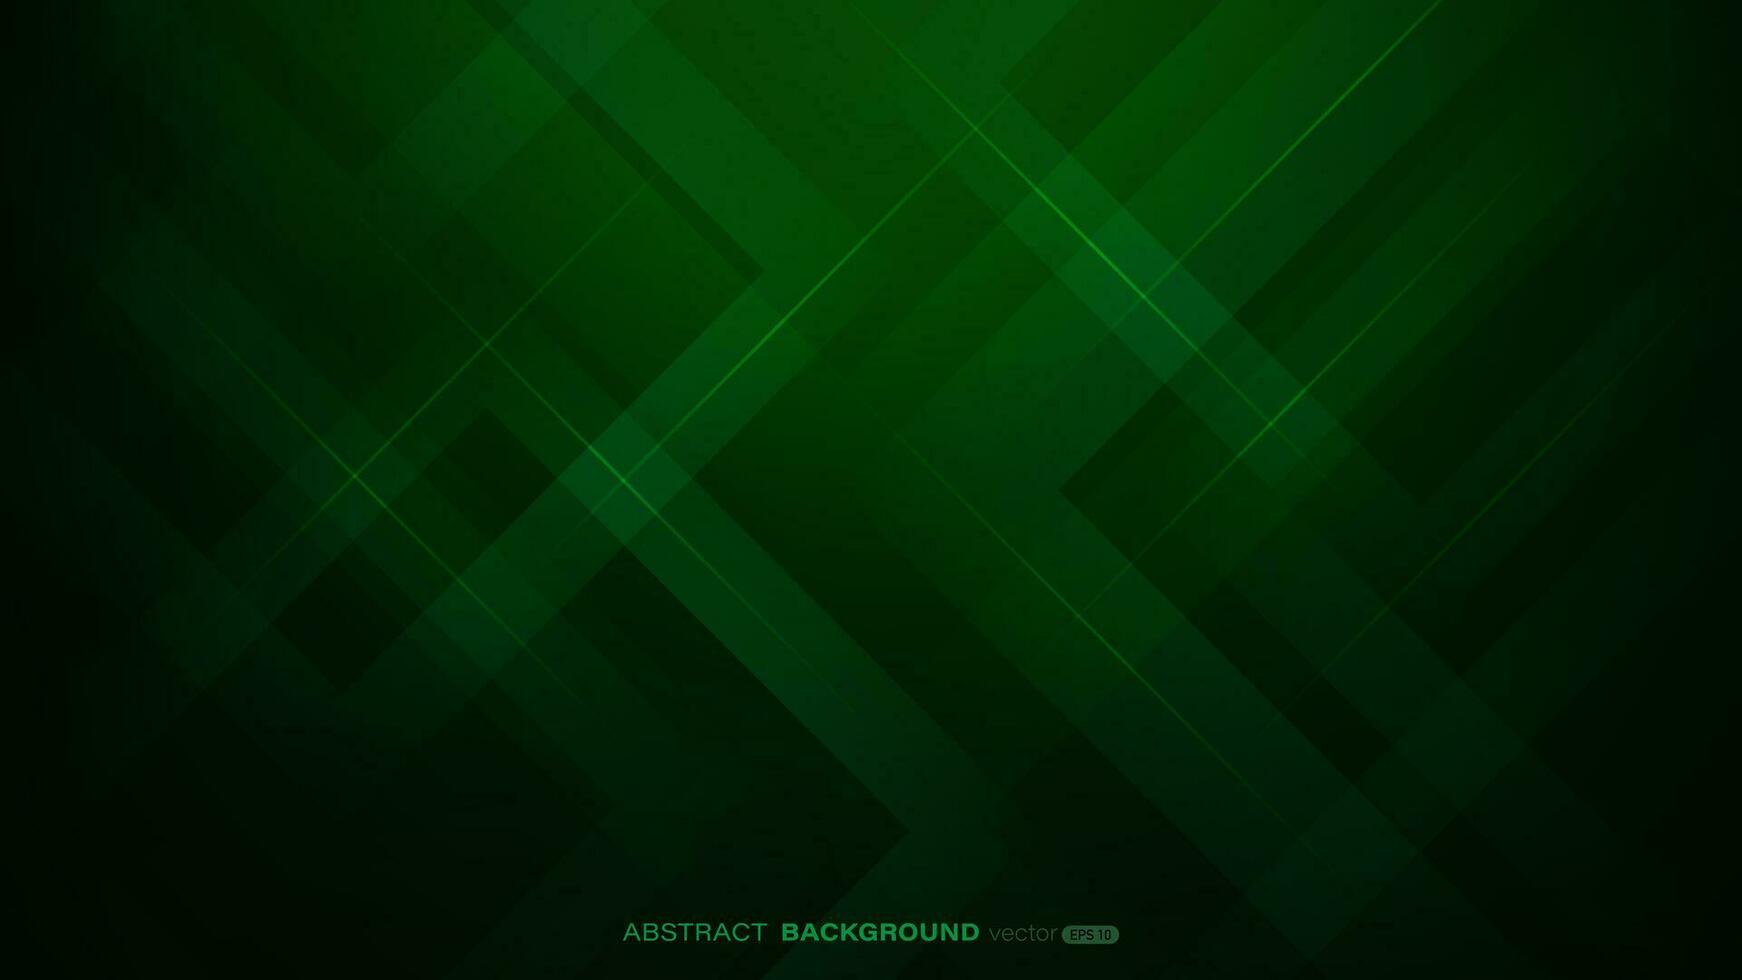 Abstract geometric shape with lines decoration on dark green background vector